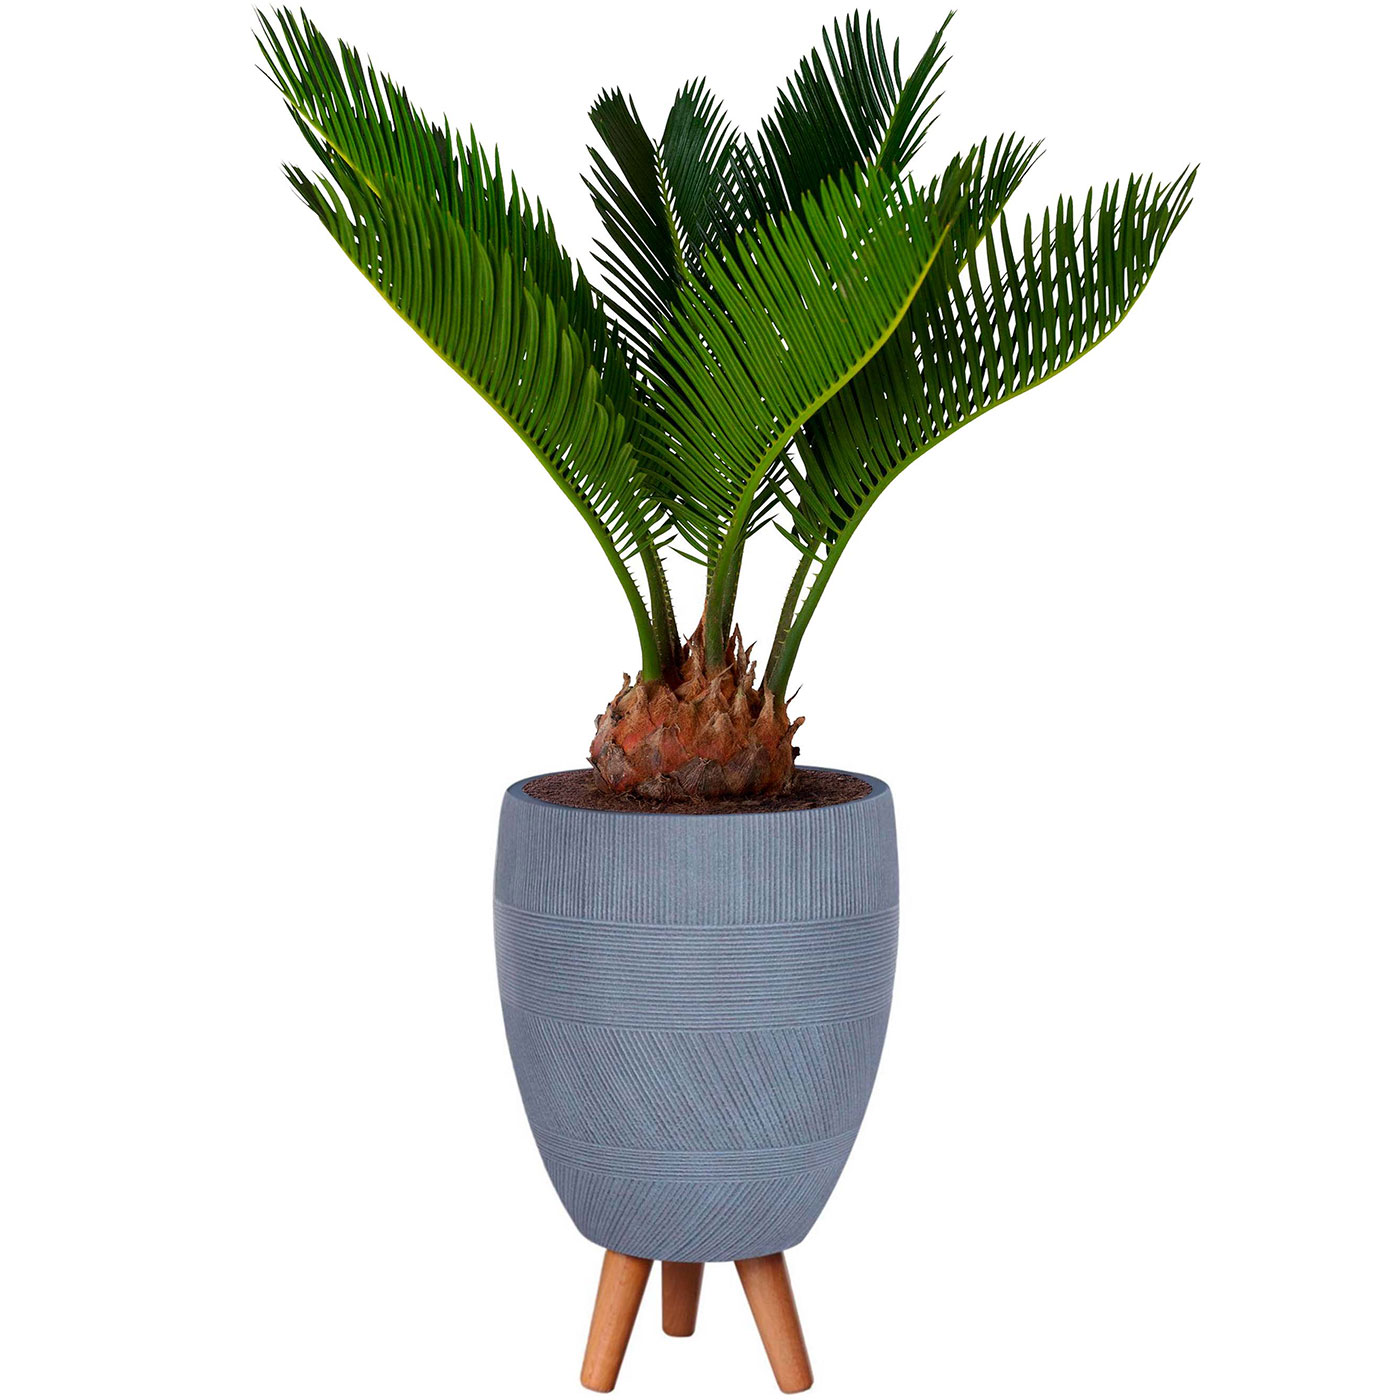 Striped Grey Indoor Egg Planter with Legs D27 H43 cm, 15.2 ltrs Cap.